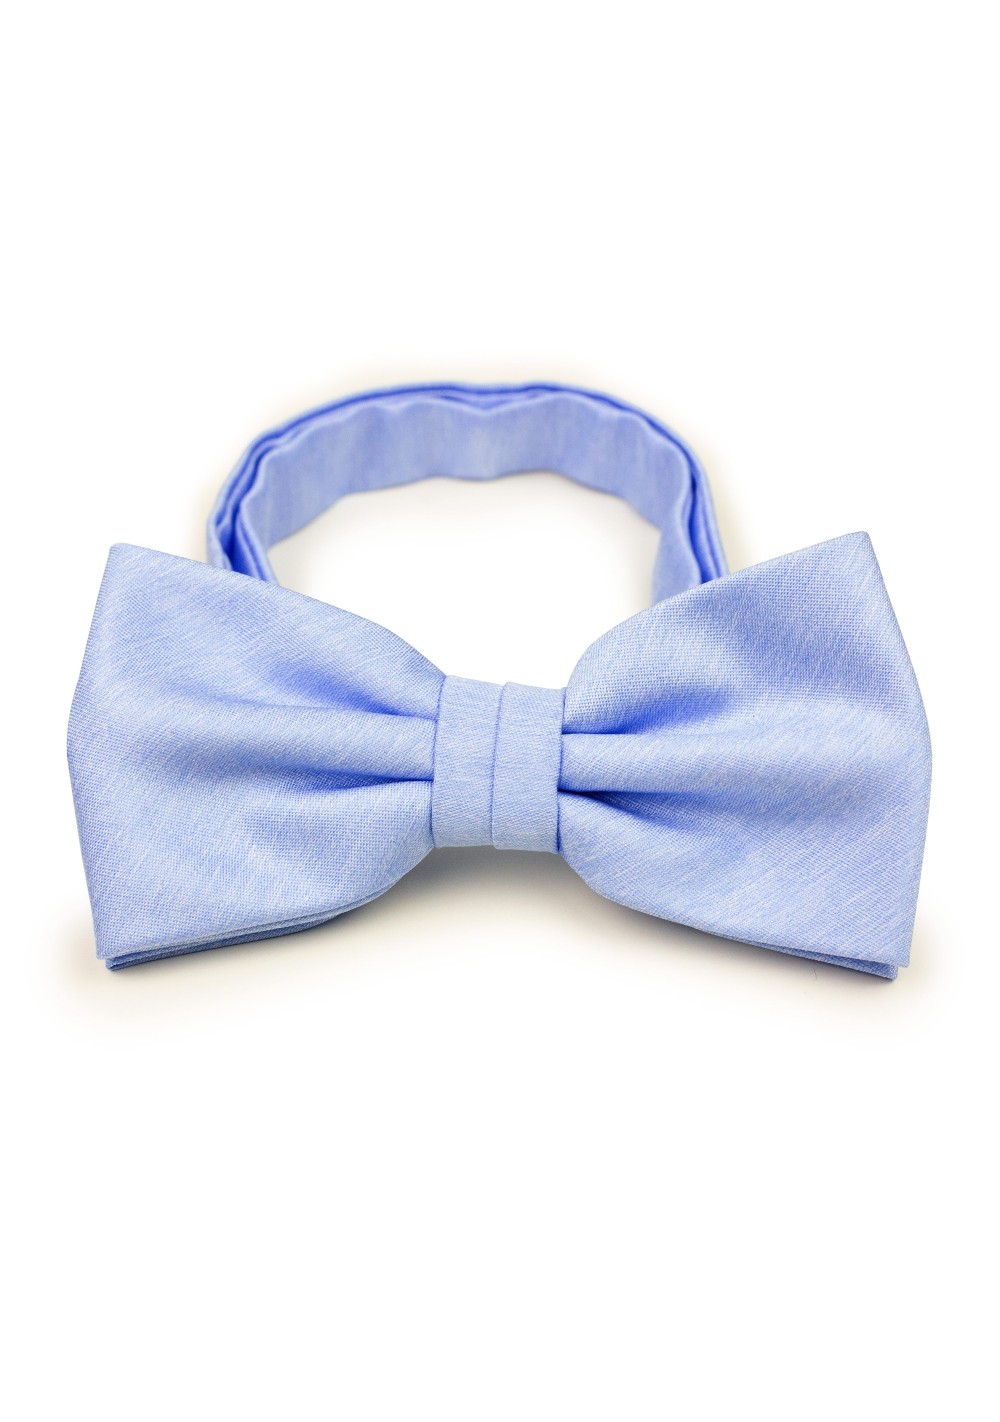 Bow and Mask Set in Sky Blue | Solid Light Blue Face Mask, Bow Tie, and ...